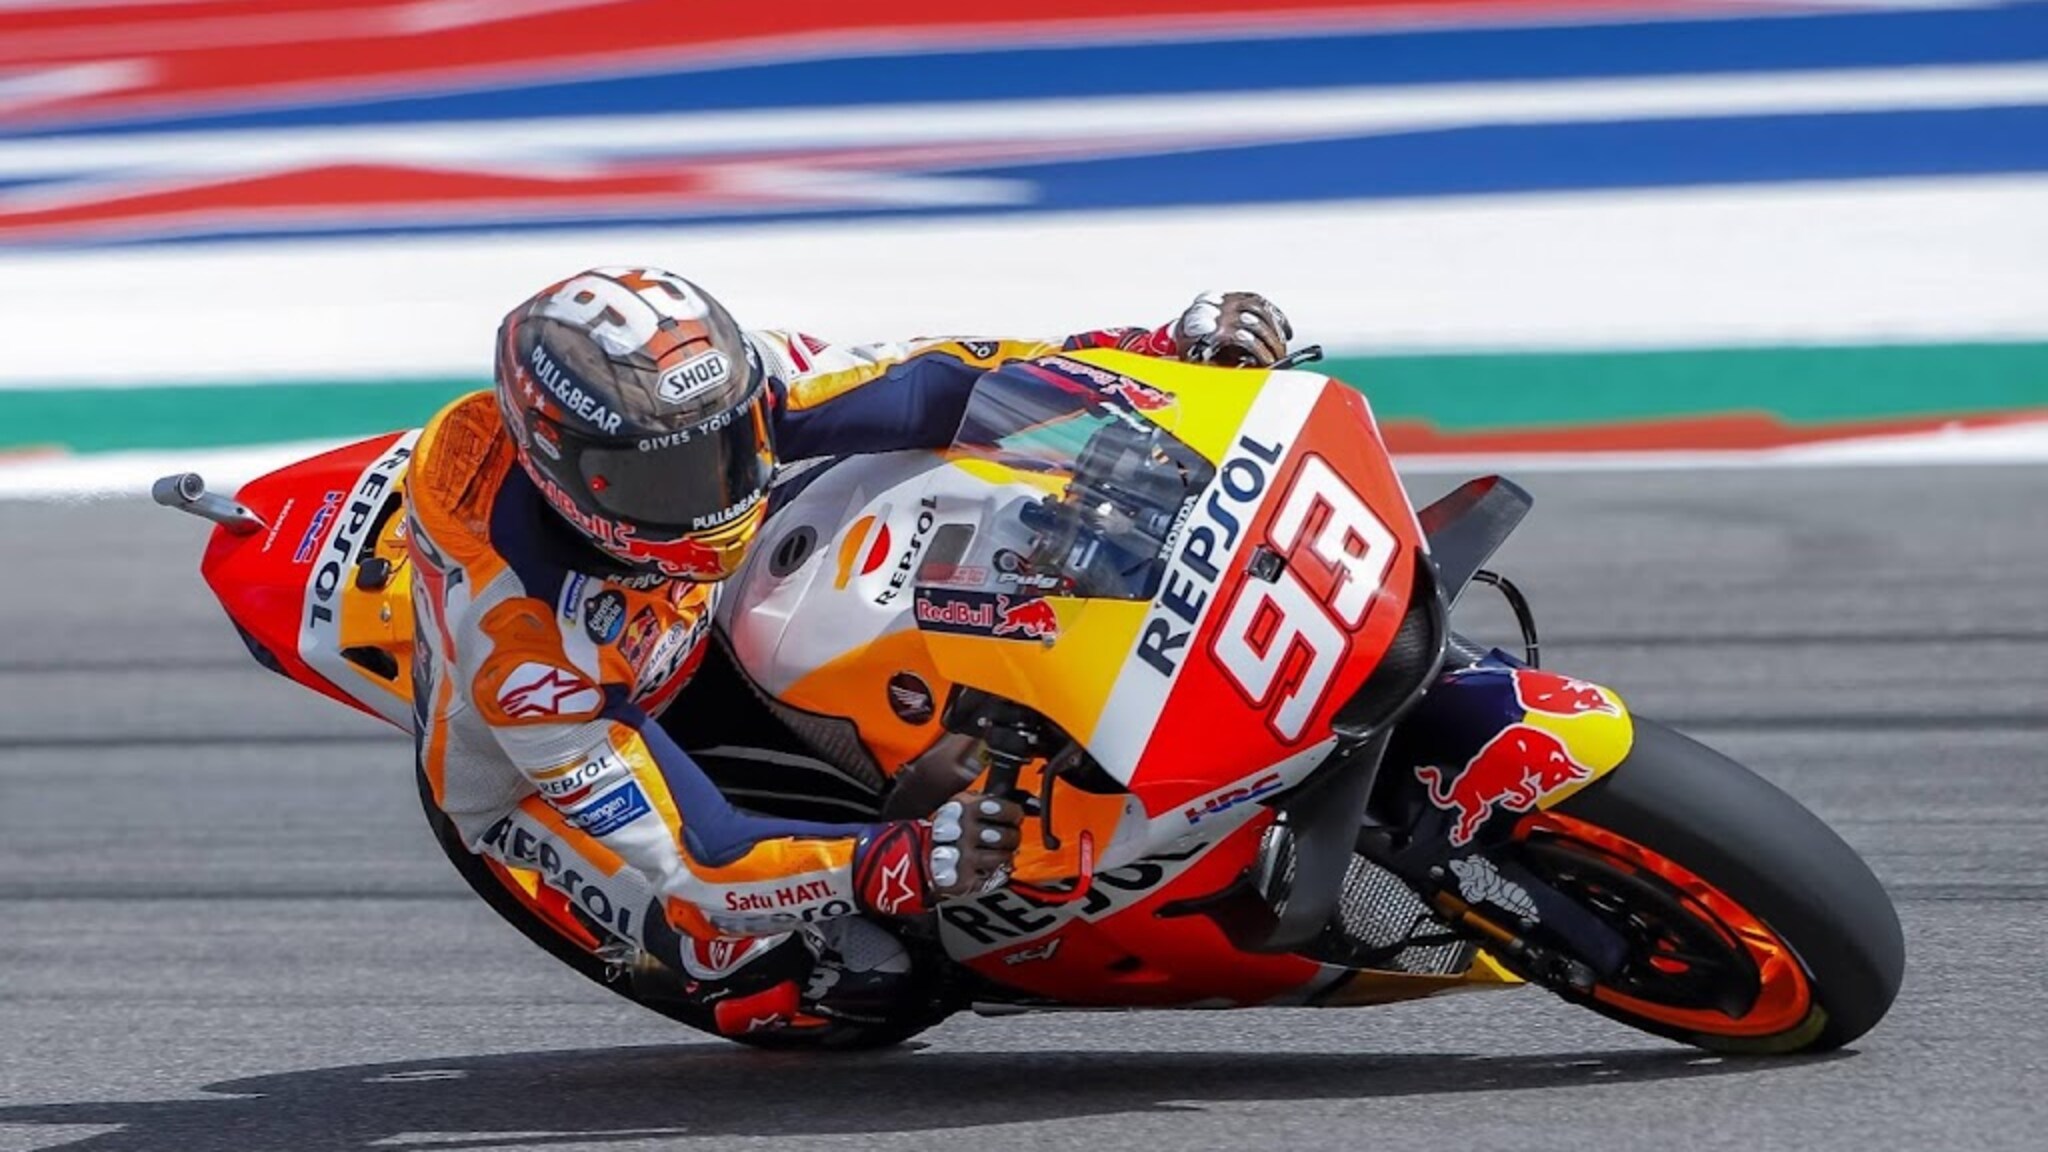 MotoGP rider Marquez named best in Texas for the seventh time